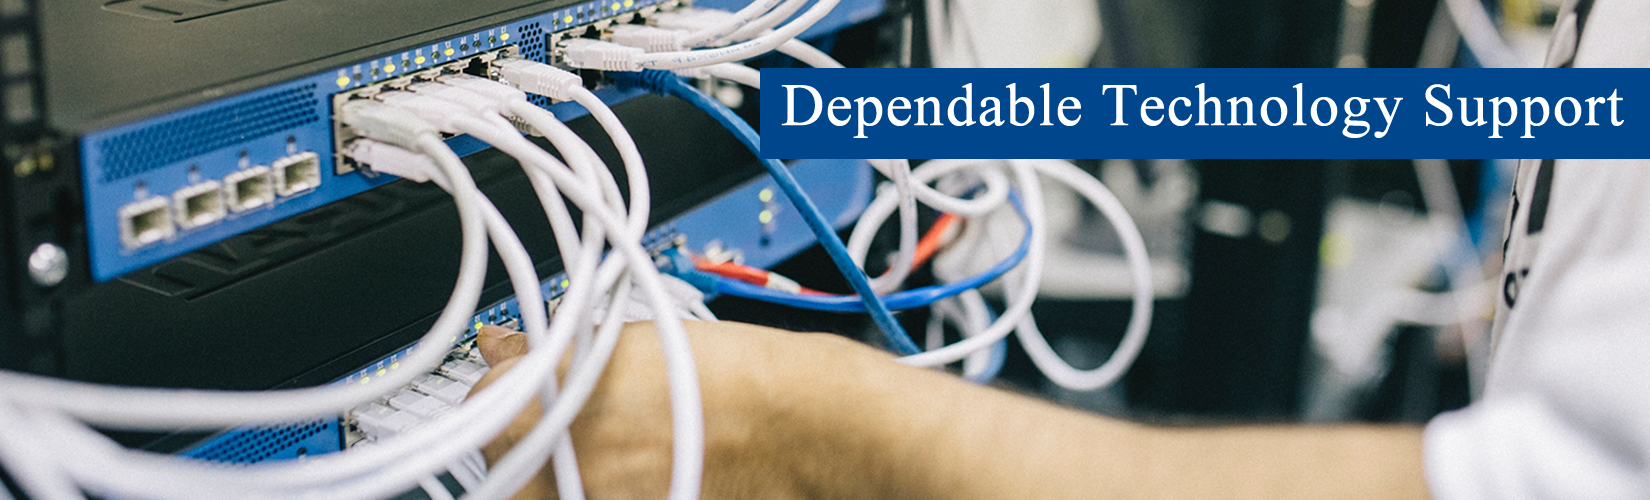 Dependable Technology Support for Your Business  | Second Creek Technologies